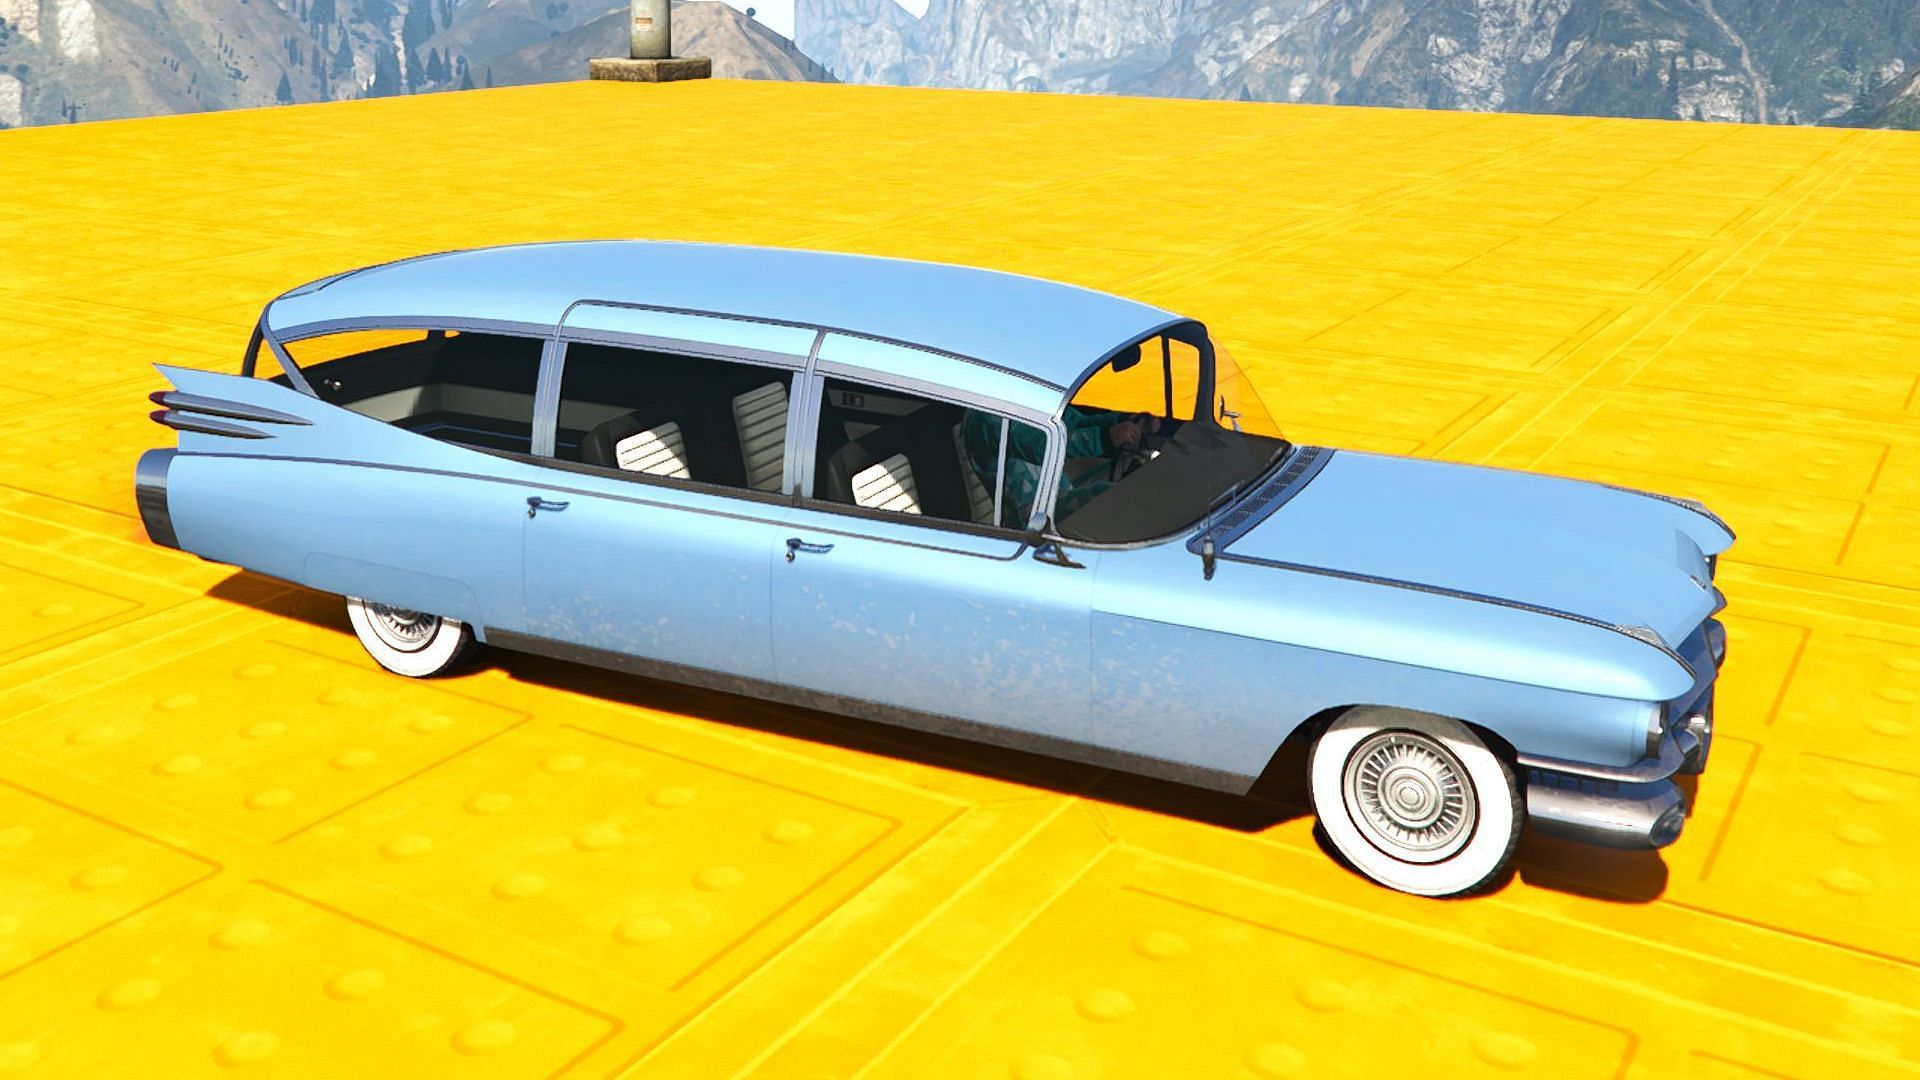 You can test-drive the Albany Brigham here (Image via Rockstar Games)